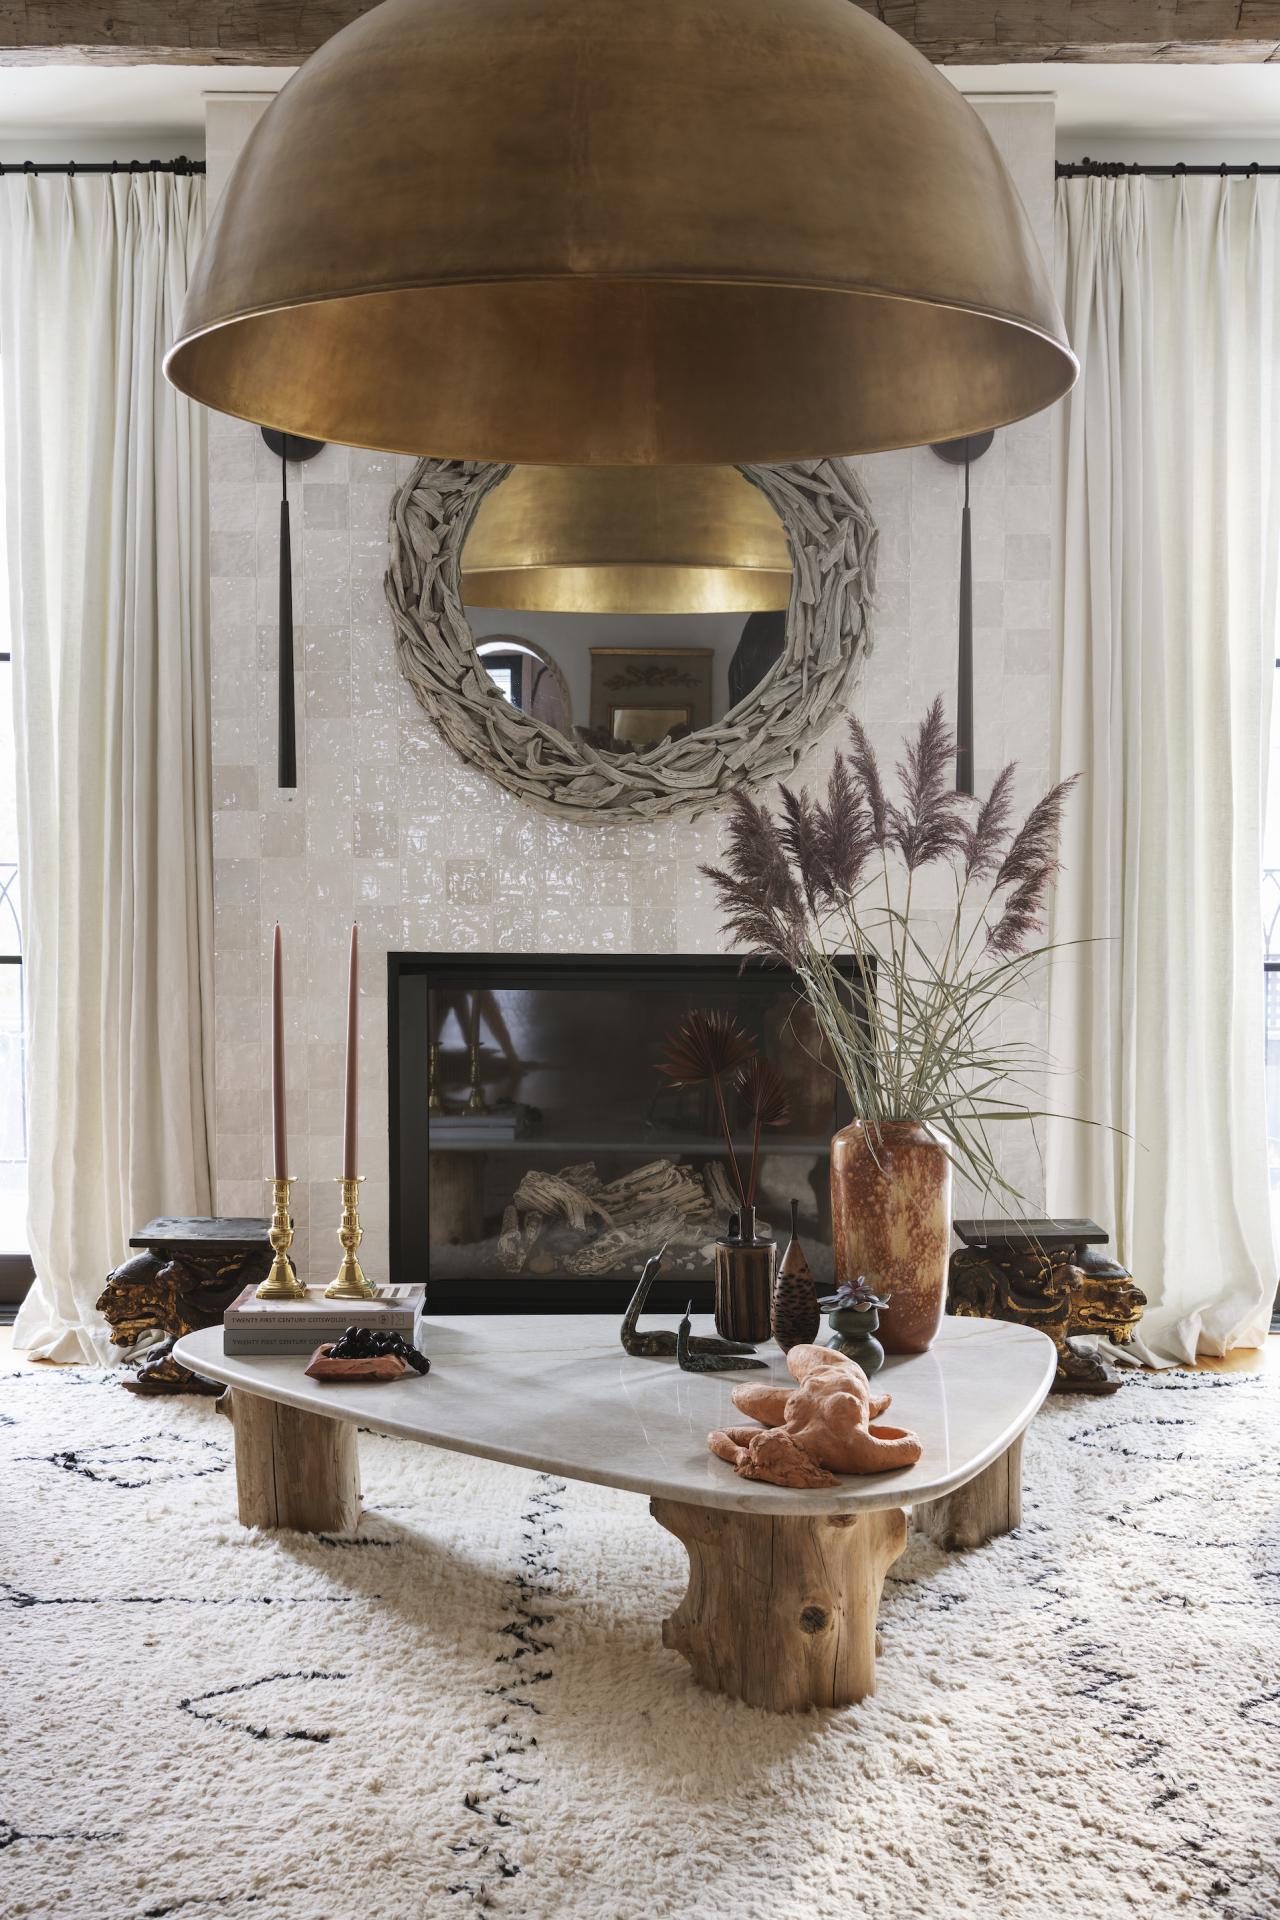 Interior designer Henrietta Southam's 2,800 sq ft Tribal Chic Home for Her Blended Family in Canada